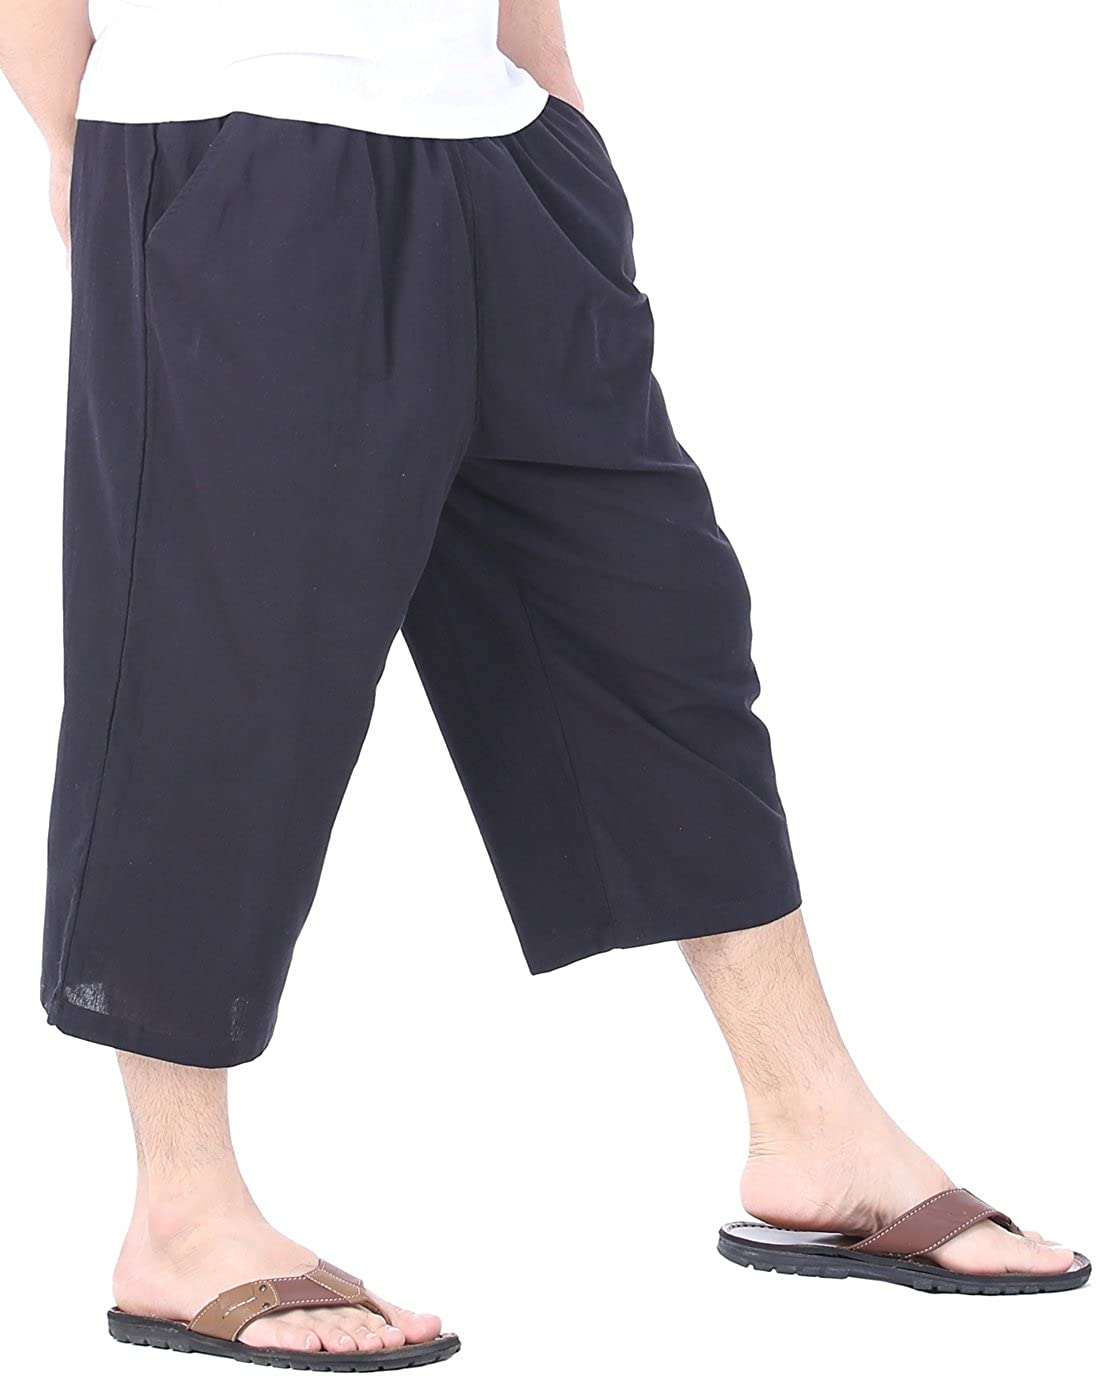 Whitewhale Mens Cotton Loose Joggers Casual Lounge Pajama Gym Workout